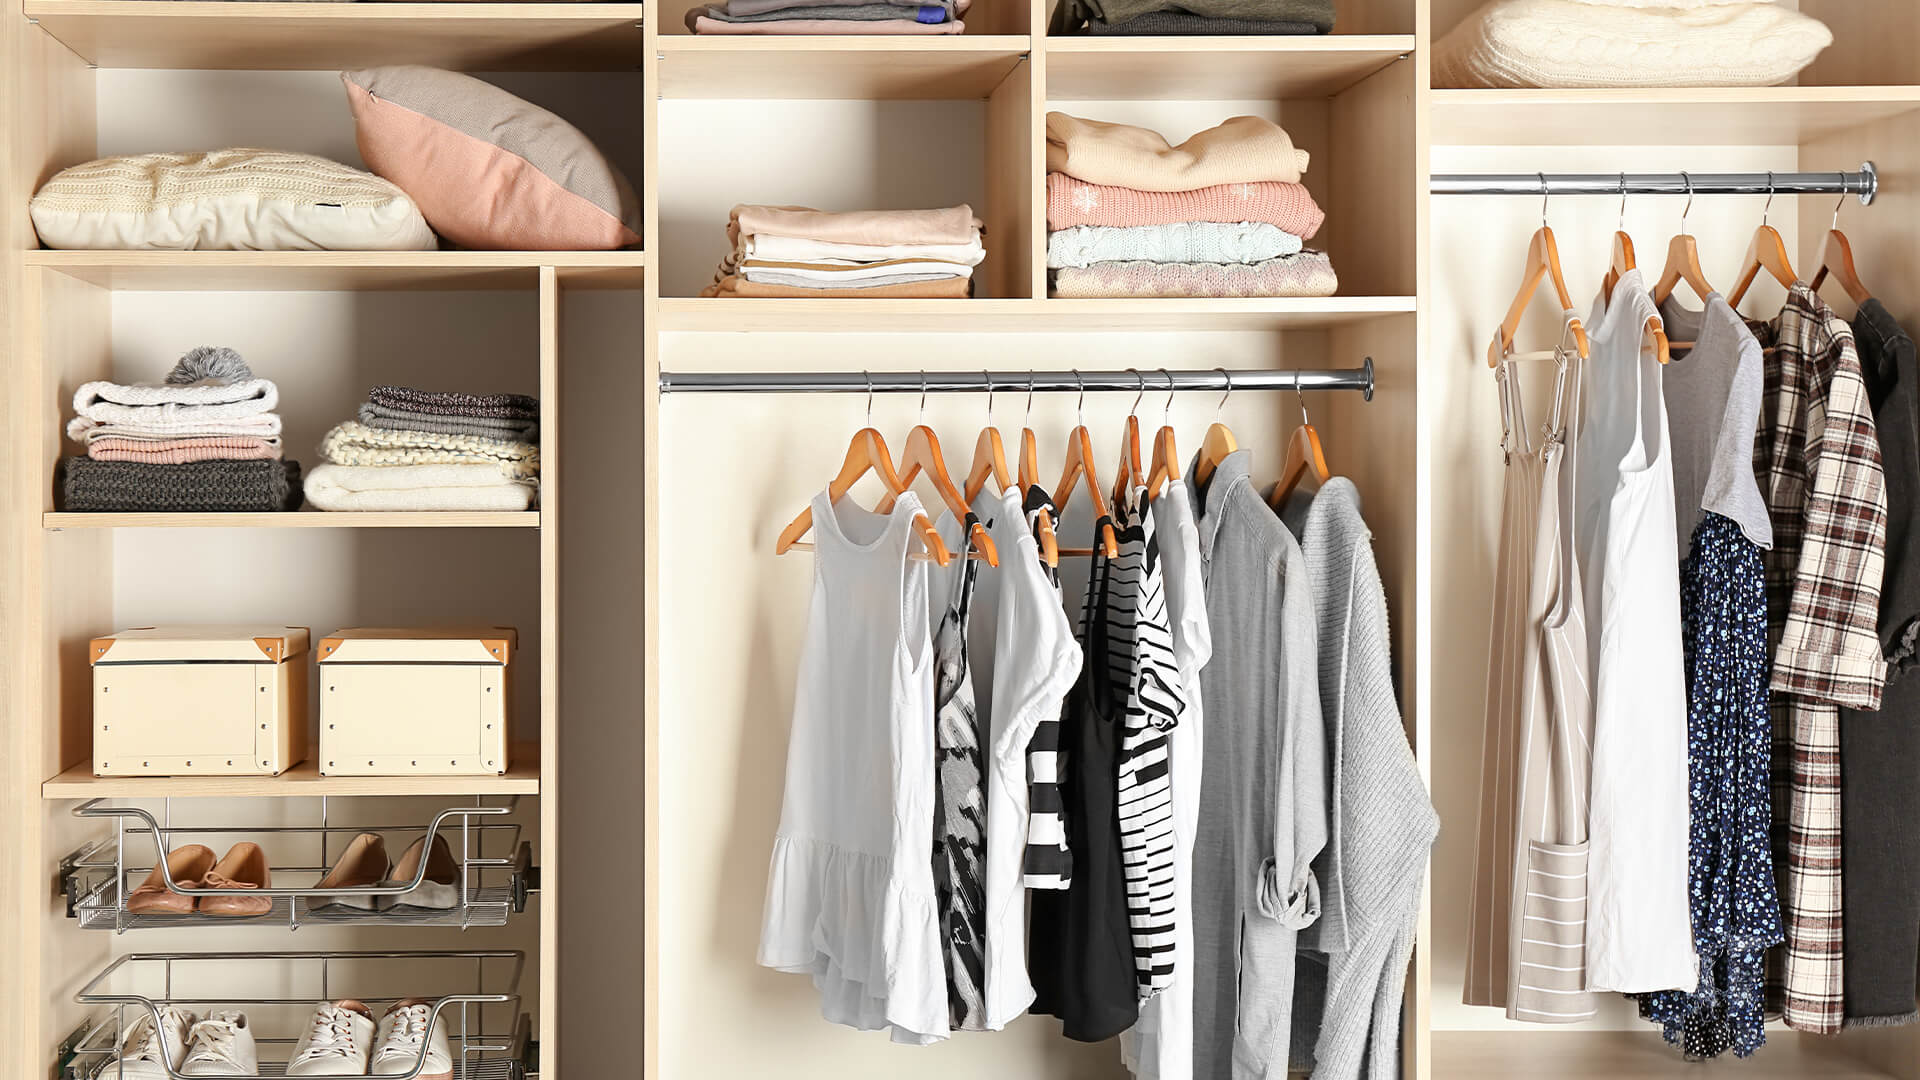 How to Store Your Things, Make More Space and Ease Your Life - LUXlife ...